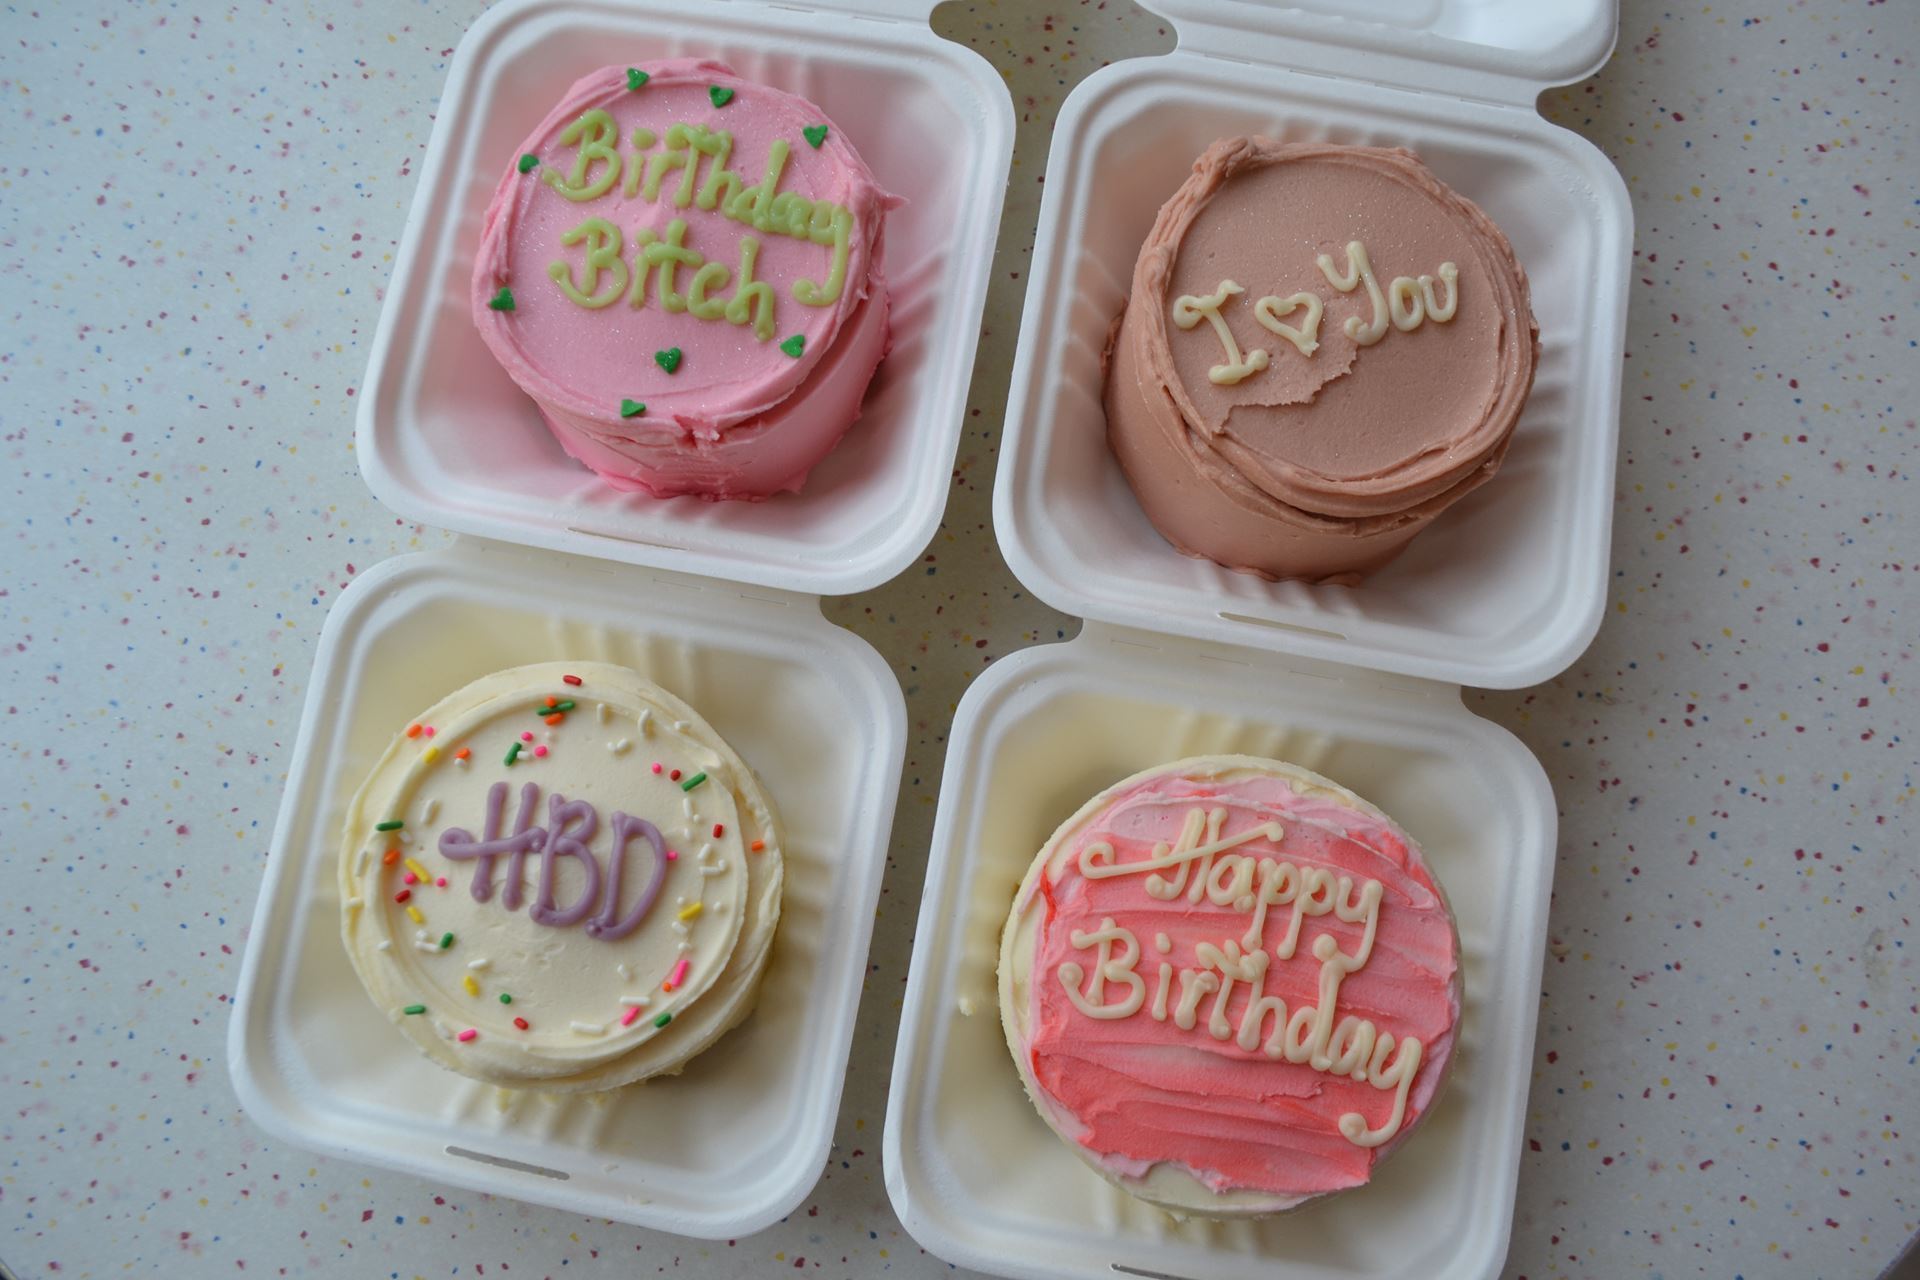 Lunch Box Cake Decorating Class - Saturday 27th April 2-3:30pm